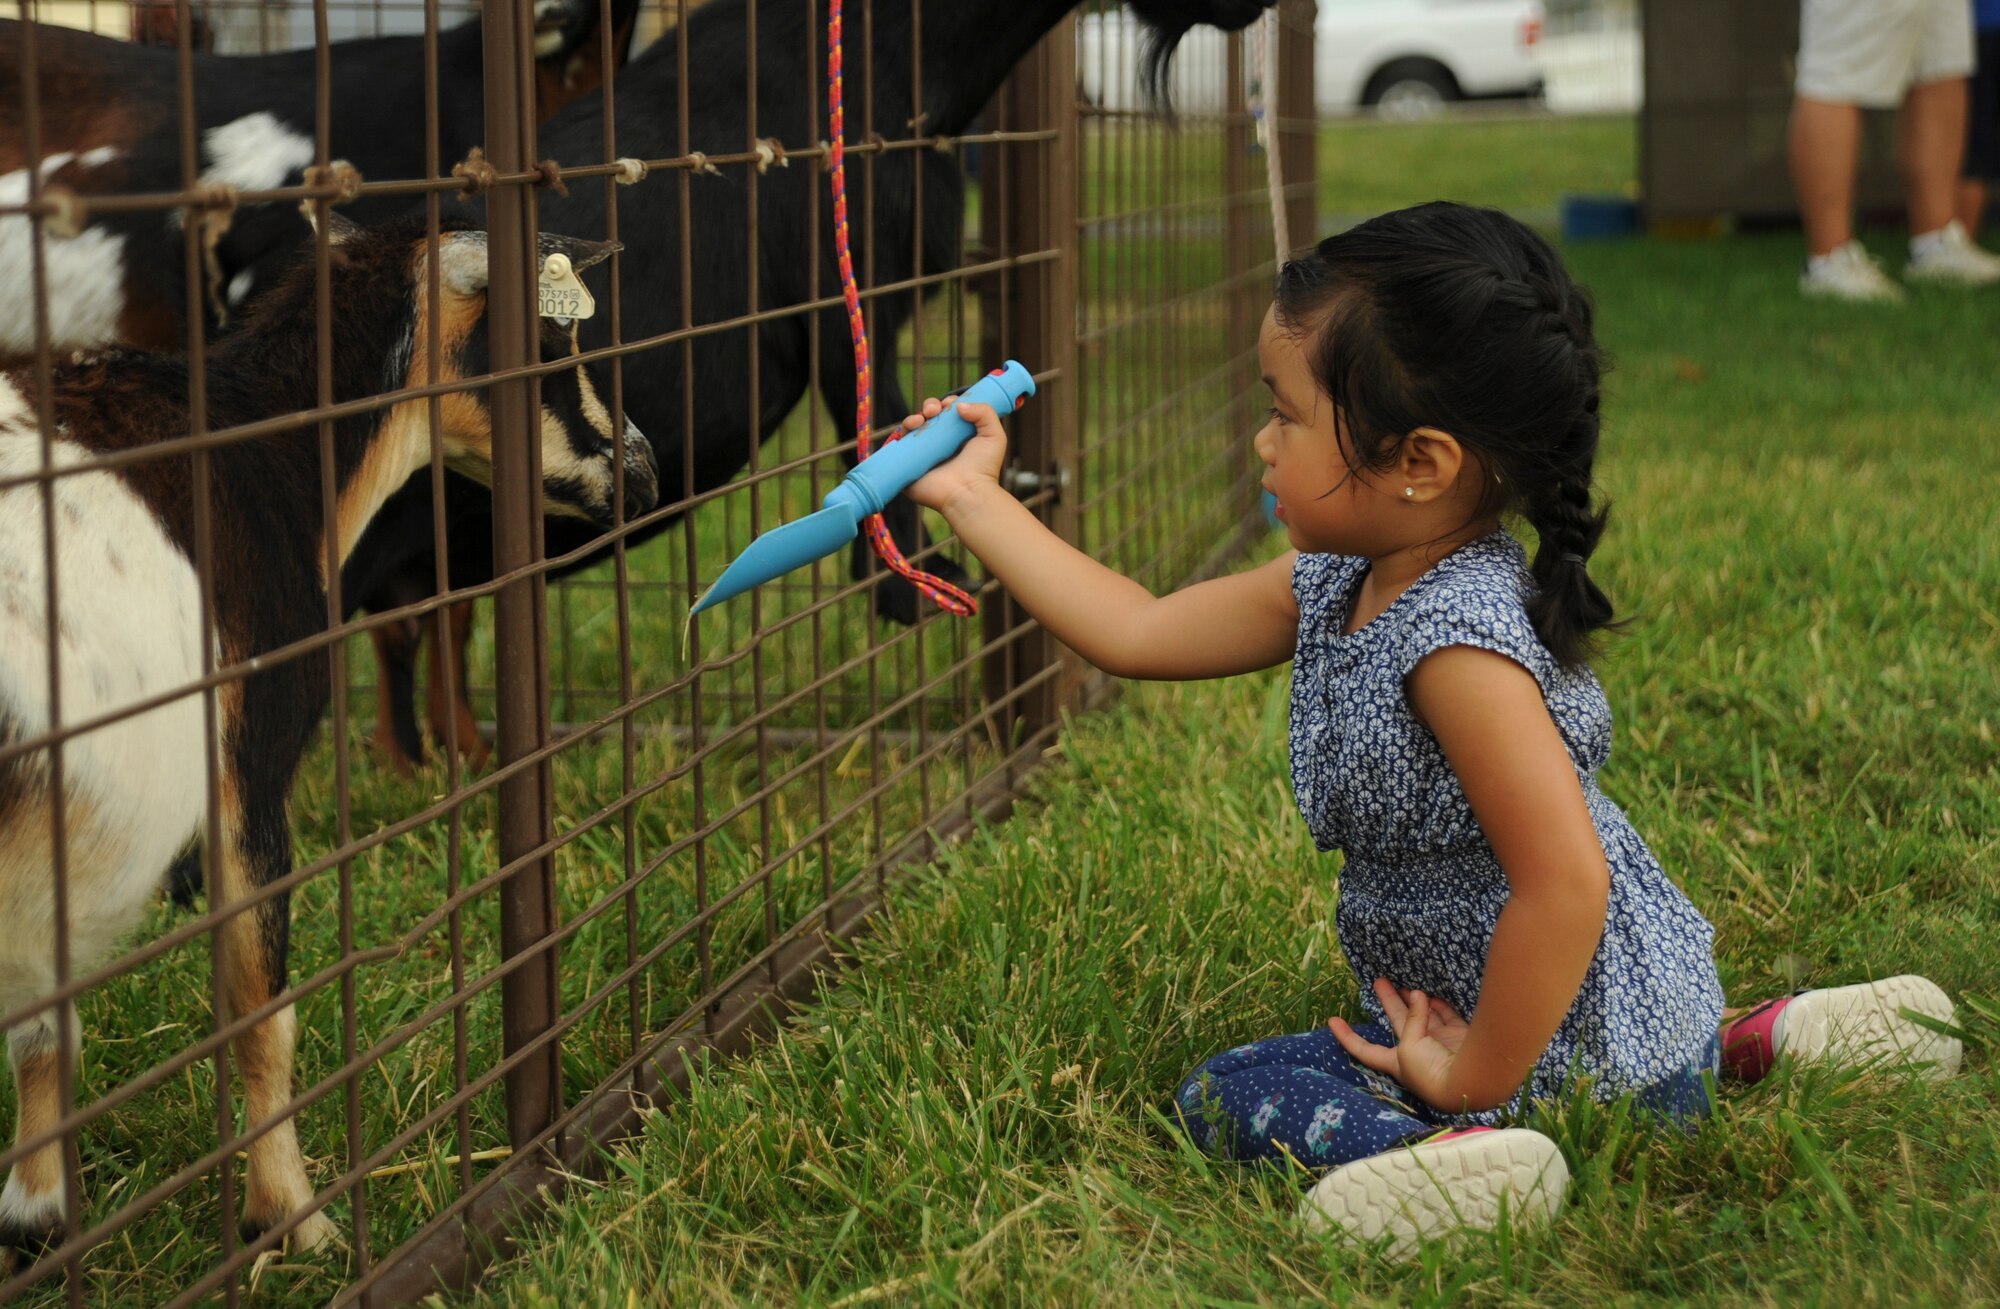 Meredith, daughter of Tech Sgt. Jaime Conui who is assigned to the 509th Maintenance Squadron, offers food to a goat during the Independence Day Celebration at Whiteman Air Force Base, Mo., June 30, 2016. Youth had the opportunity to get up close to farm animals, walk through a bird exhibit and ride a pony at the event. (U.S. Air Force photo by Senior Airman Danielle Quilla)